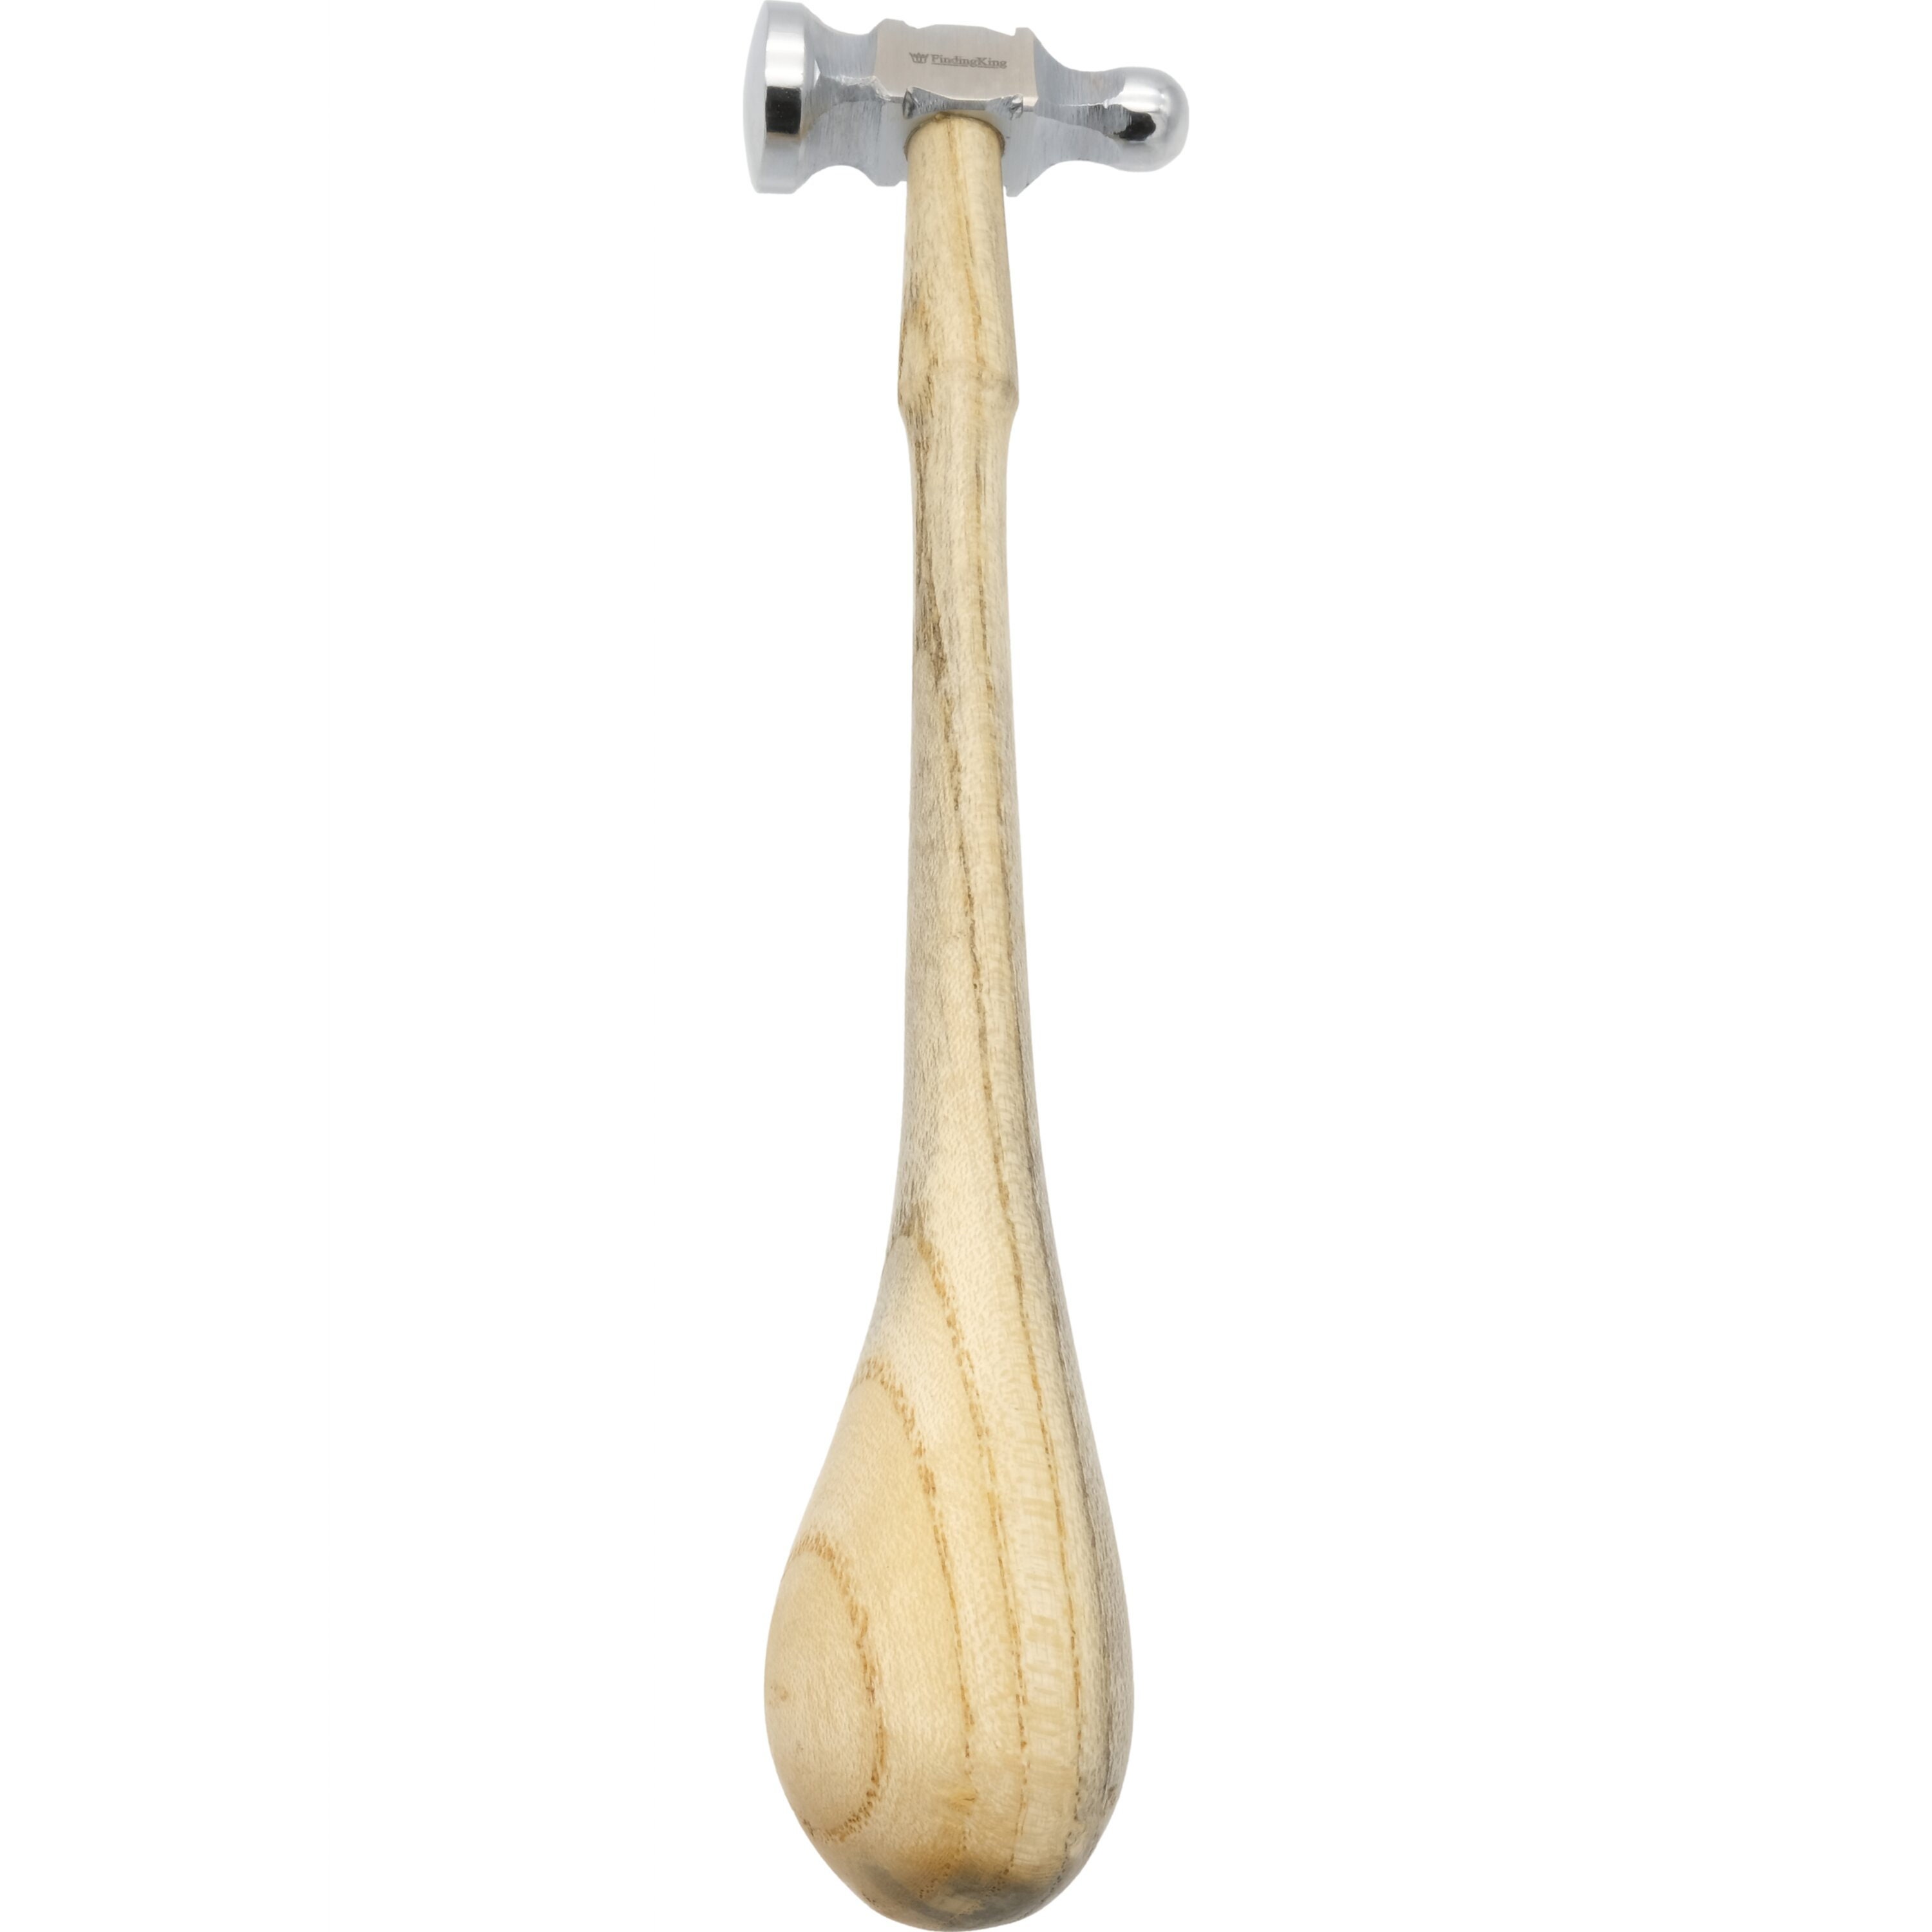 Chasing Hammer 4.5 Oz Head for Jewelry Making 37-0365 